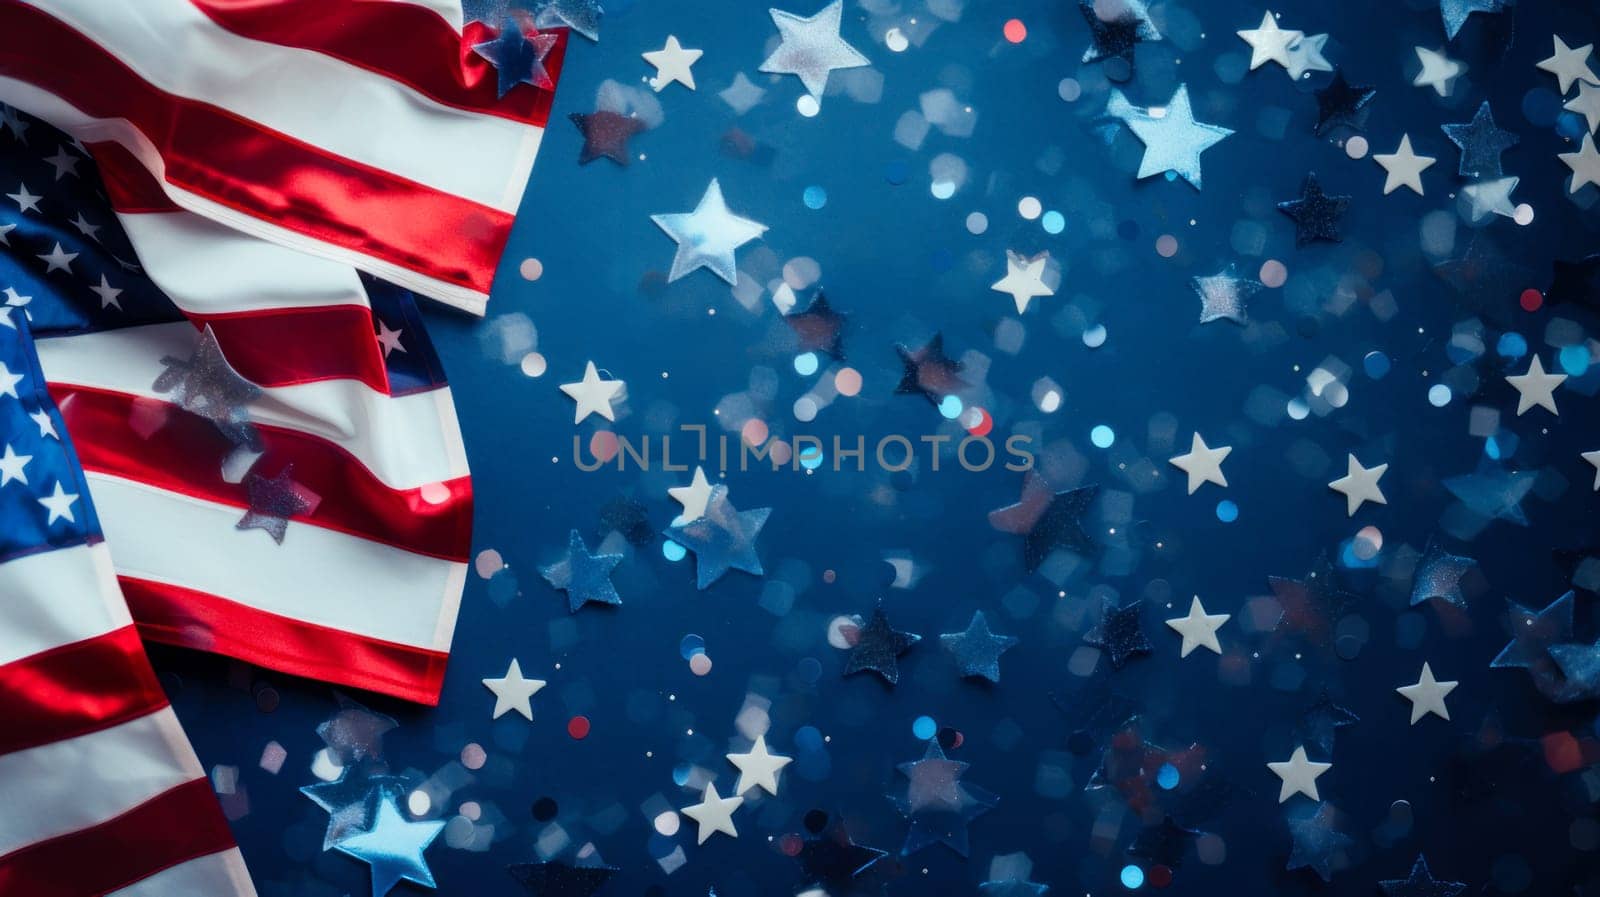 American flag, confetti stars on blue background with copy space. by Alla_Yurtayeva